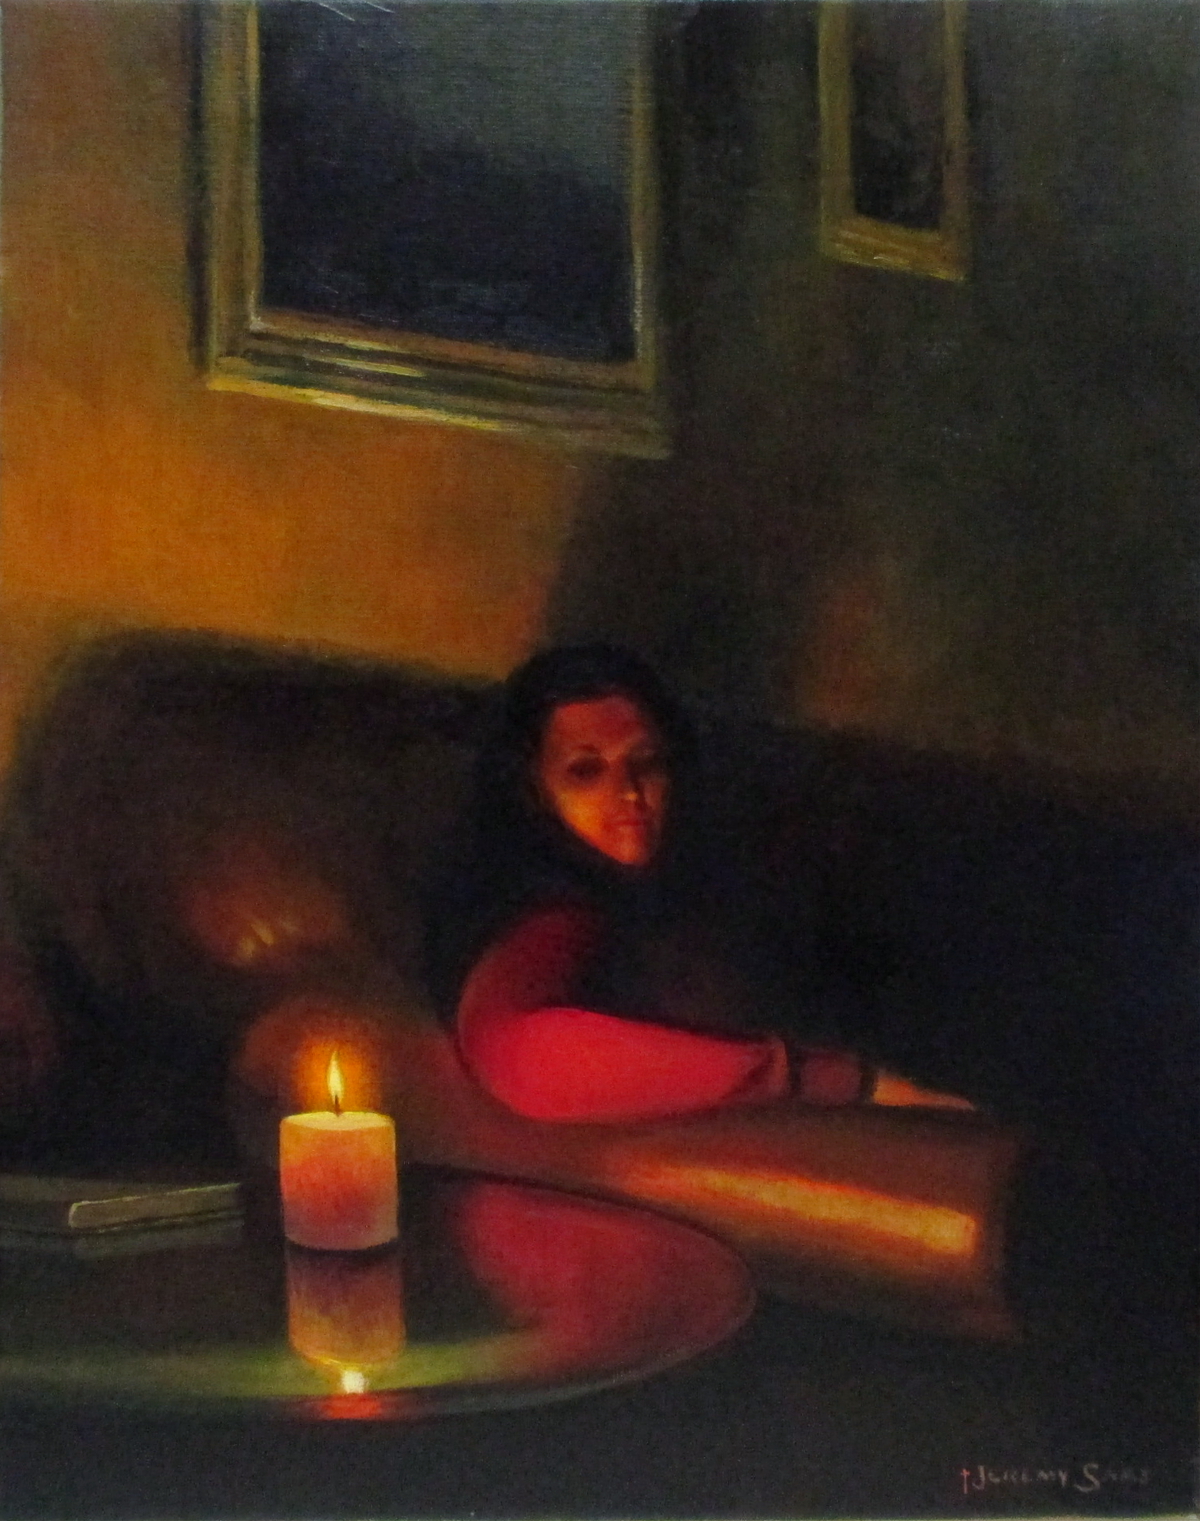 painted portrait of lady in dark with candle light by North Carolina artist Jeremy Sams